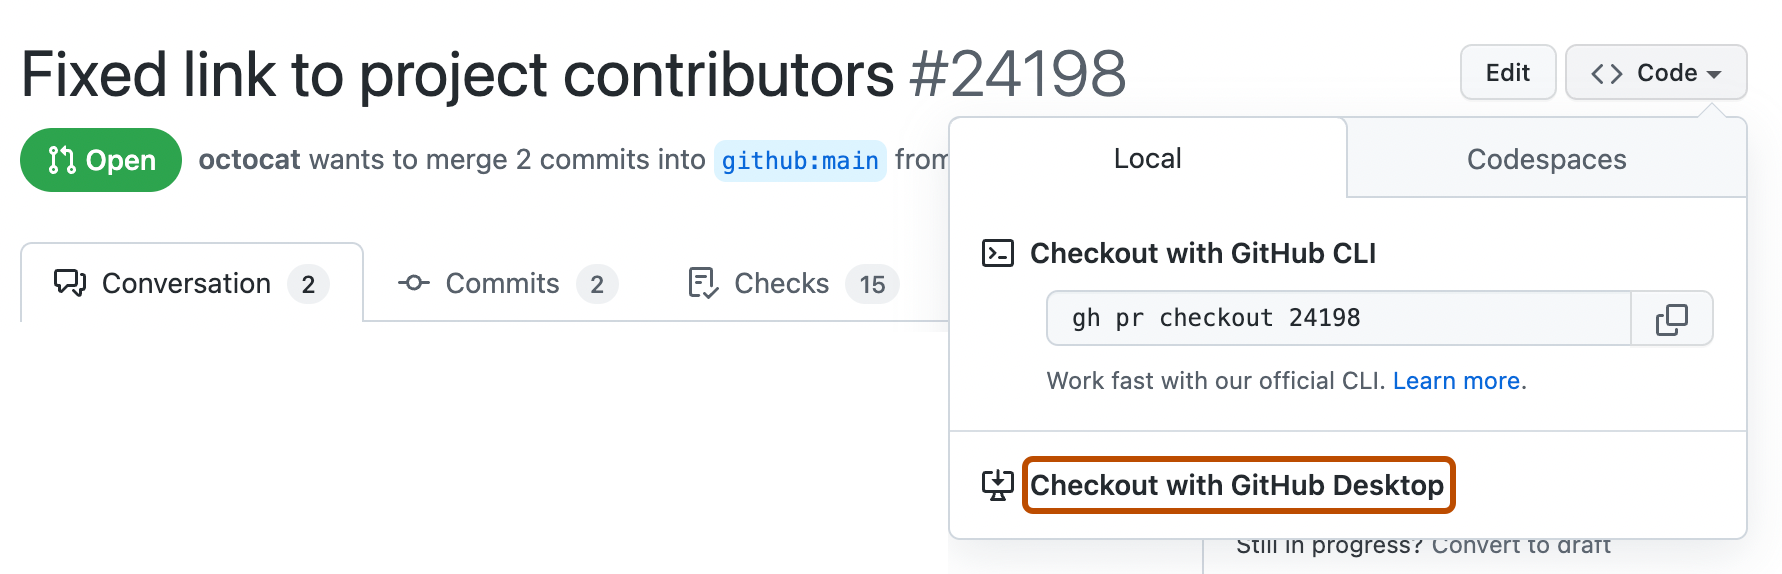 Screenshot of a pull request on GitHub. The "Code" dropdown menu is expanded, and a button, labeled "Checkout with GitHub Desktop" is outlined in orange.